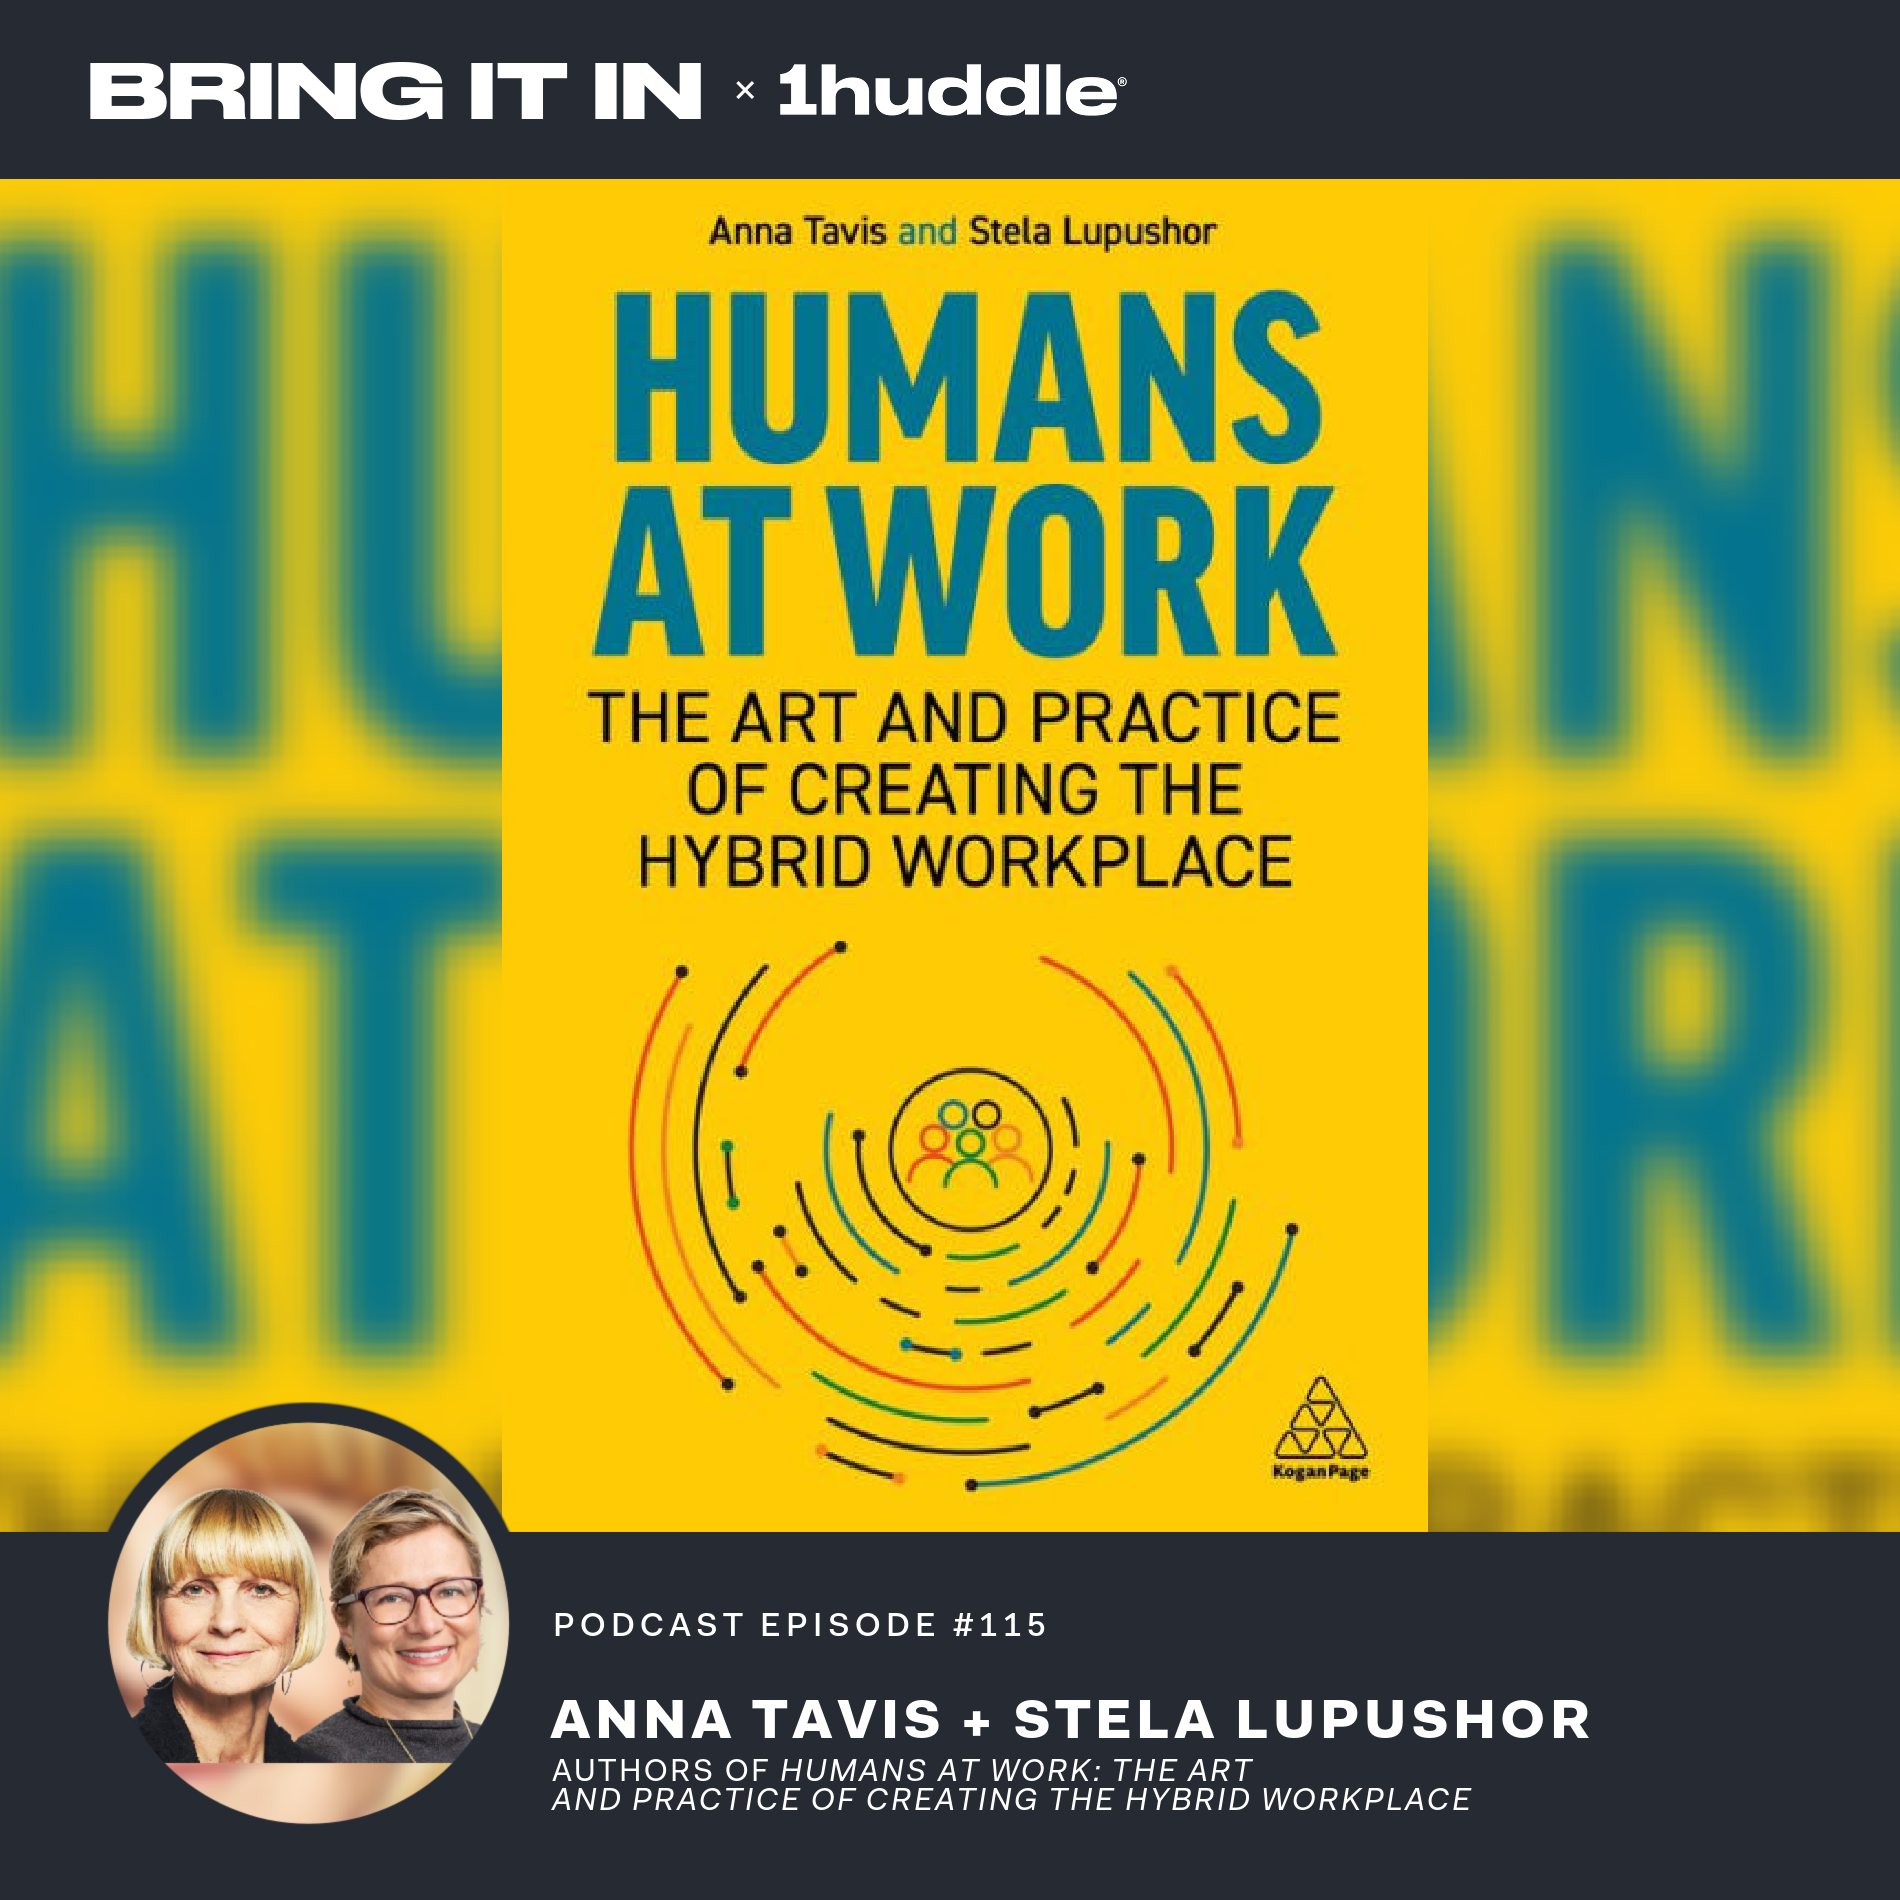 Authors of “Humans at Work: The Art and Practice of Creating the Hybrid Workplace”